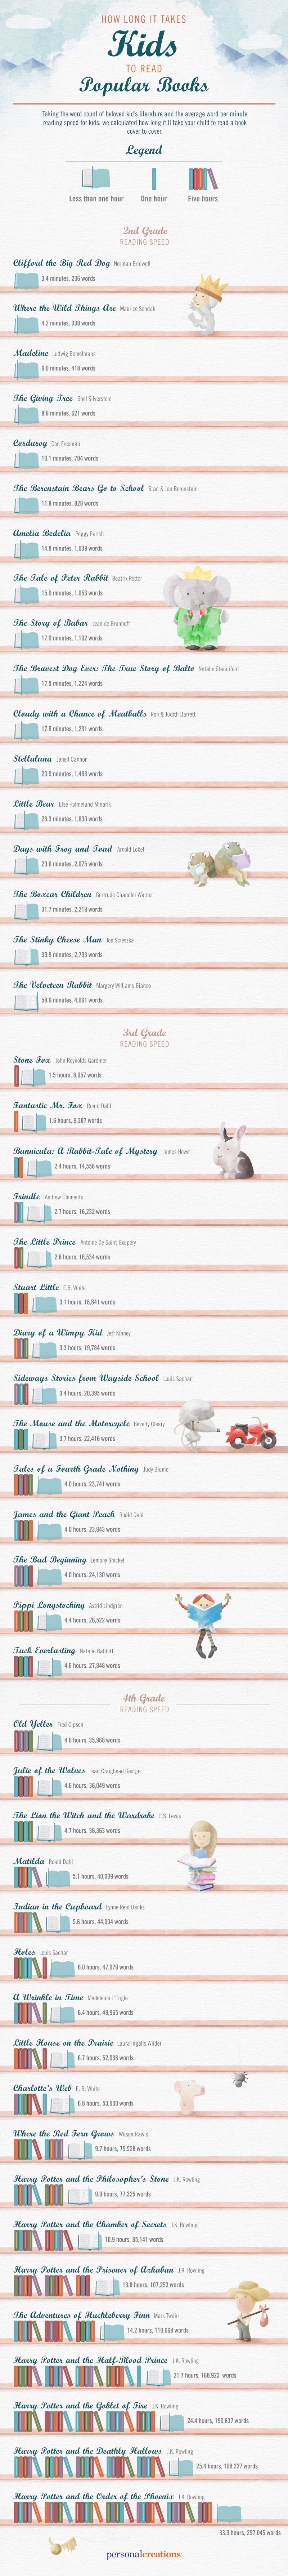 How Long it Takes Kids to Read Popular Books